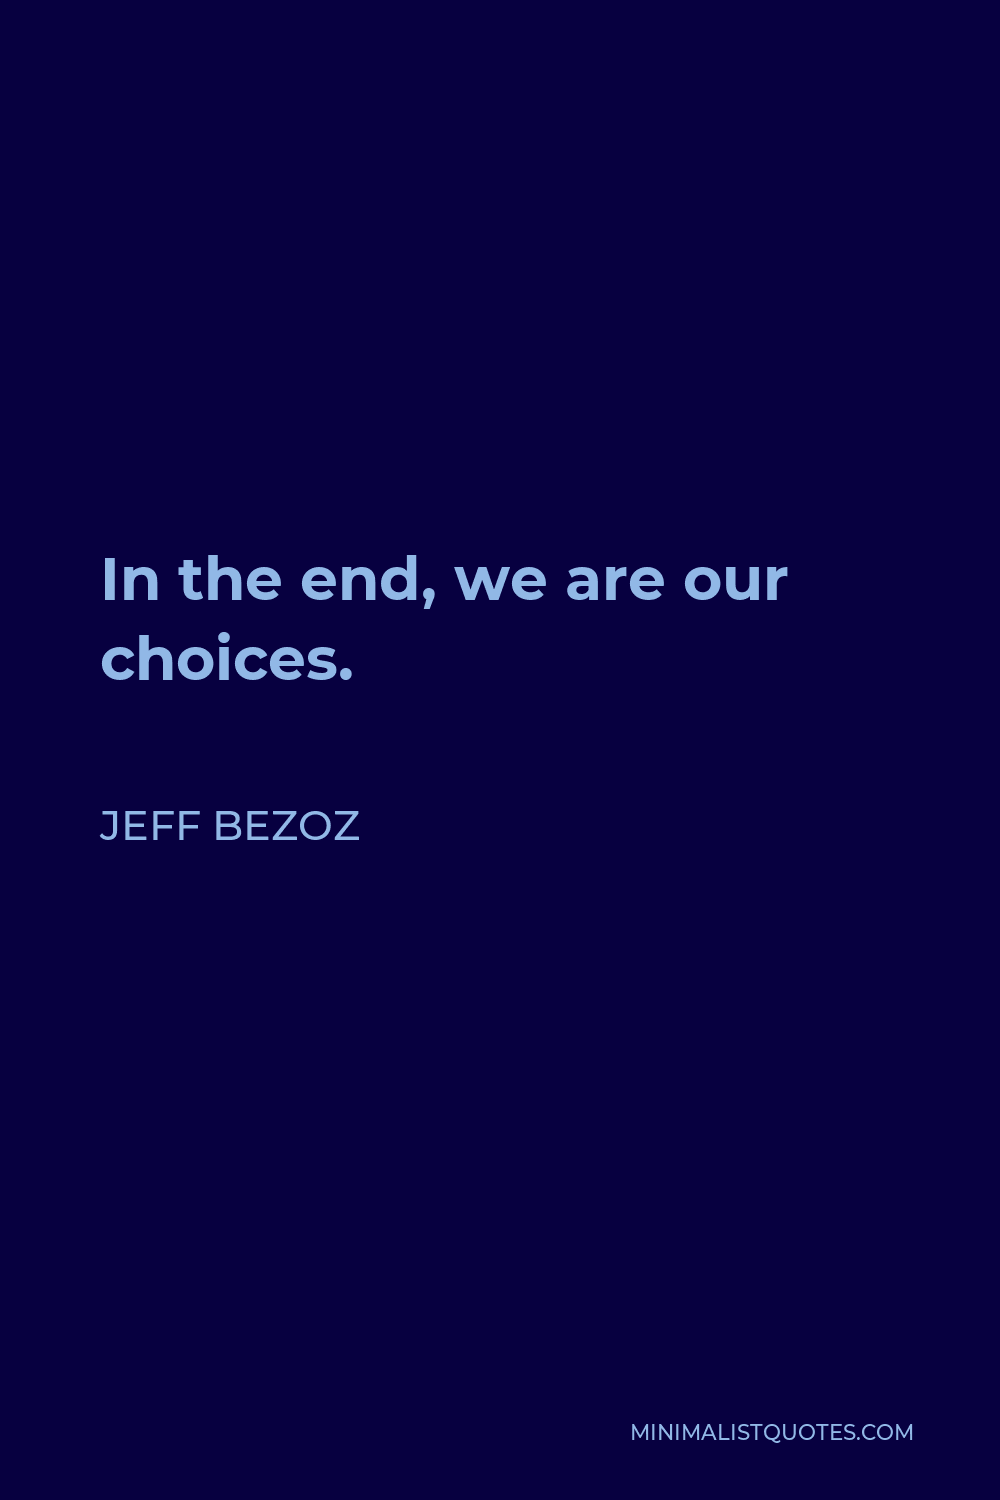 Jeff Bezoz Quote - In the end, we are our choices.